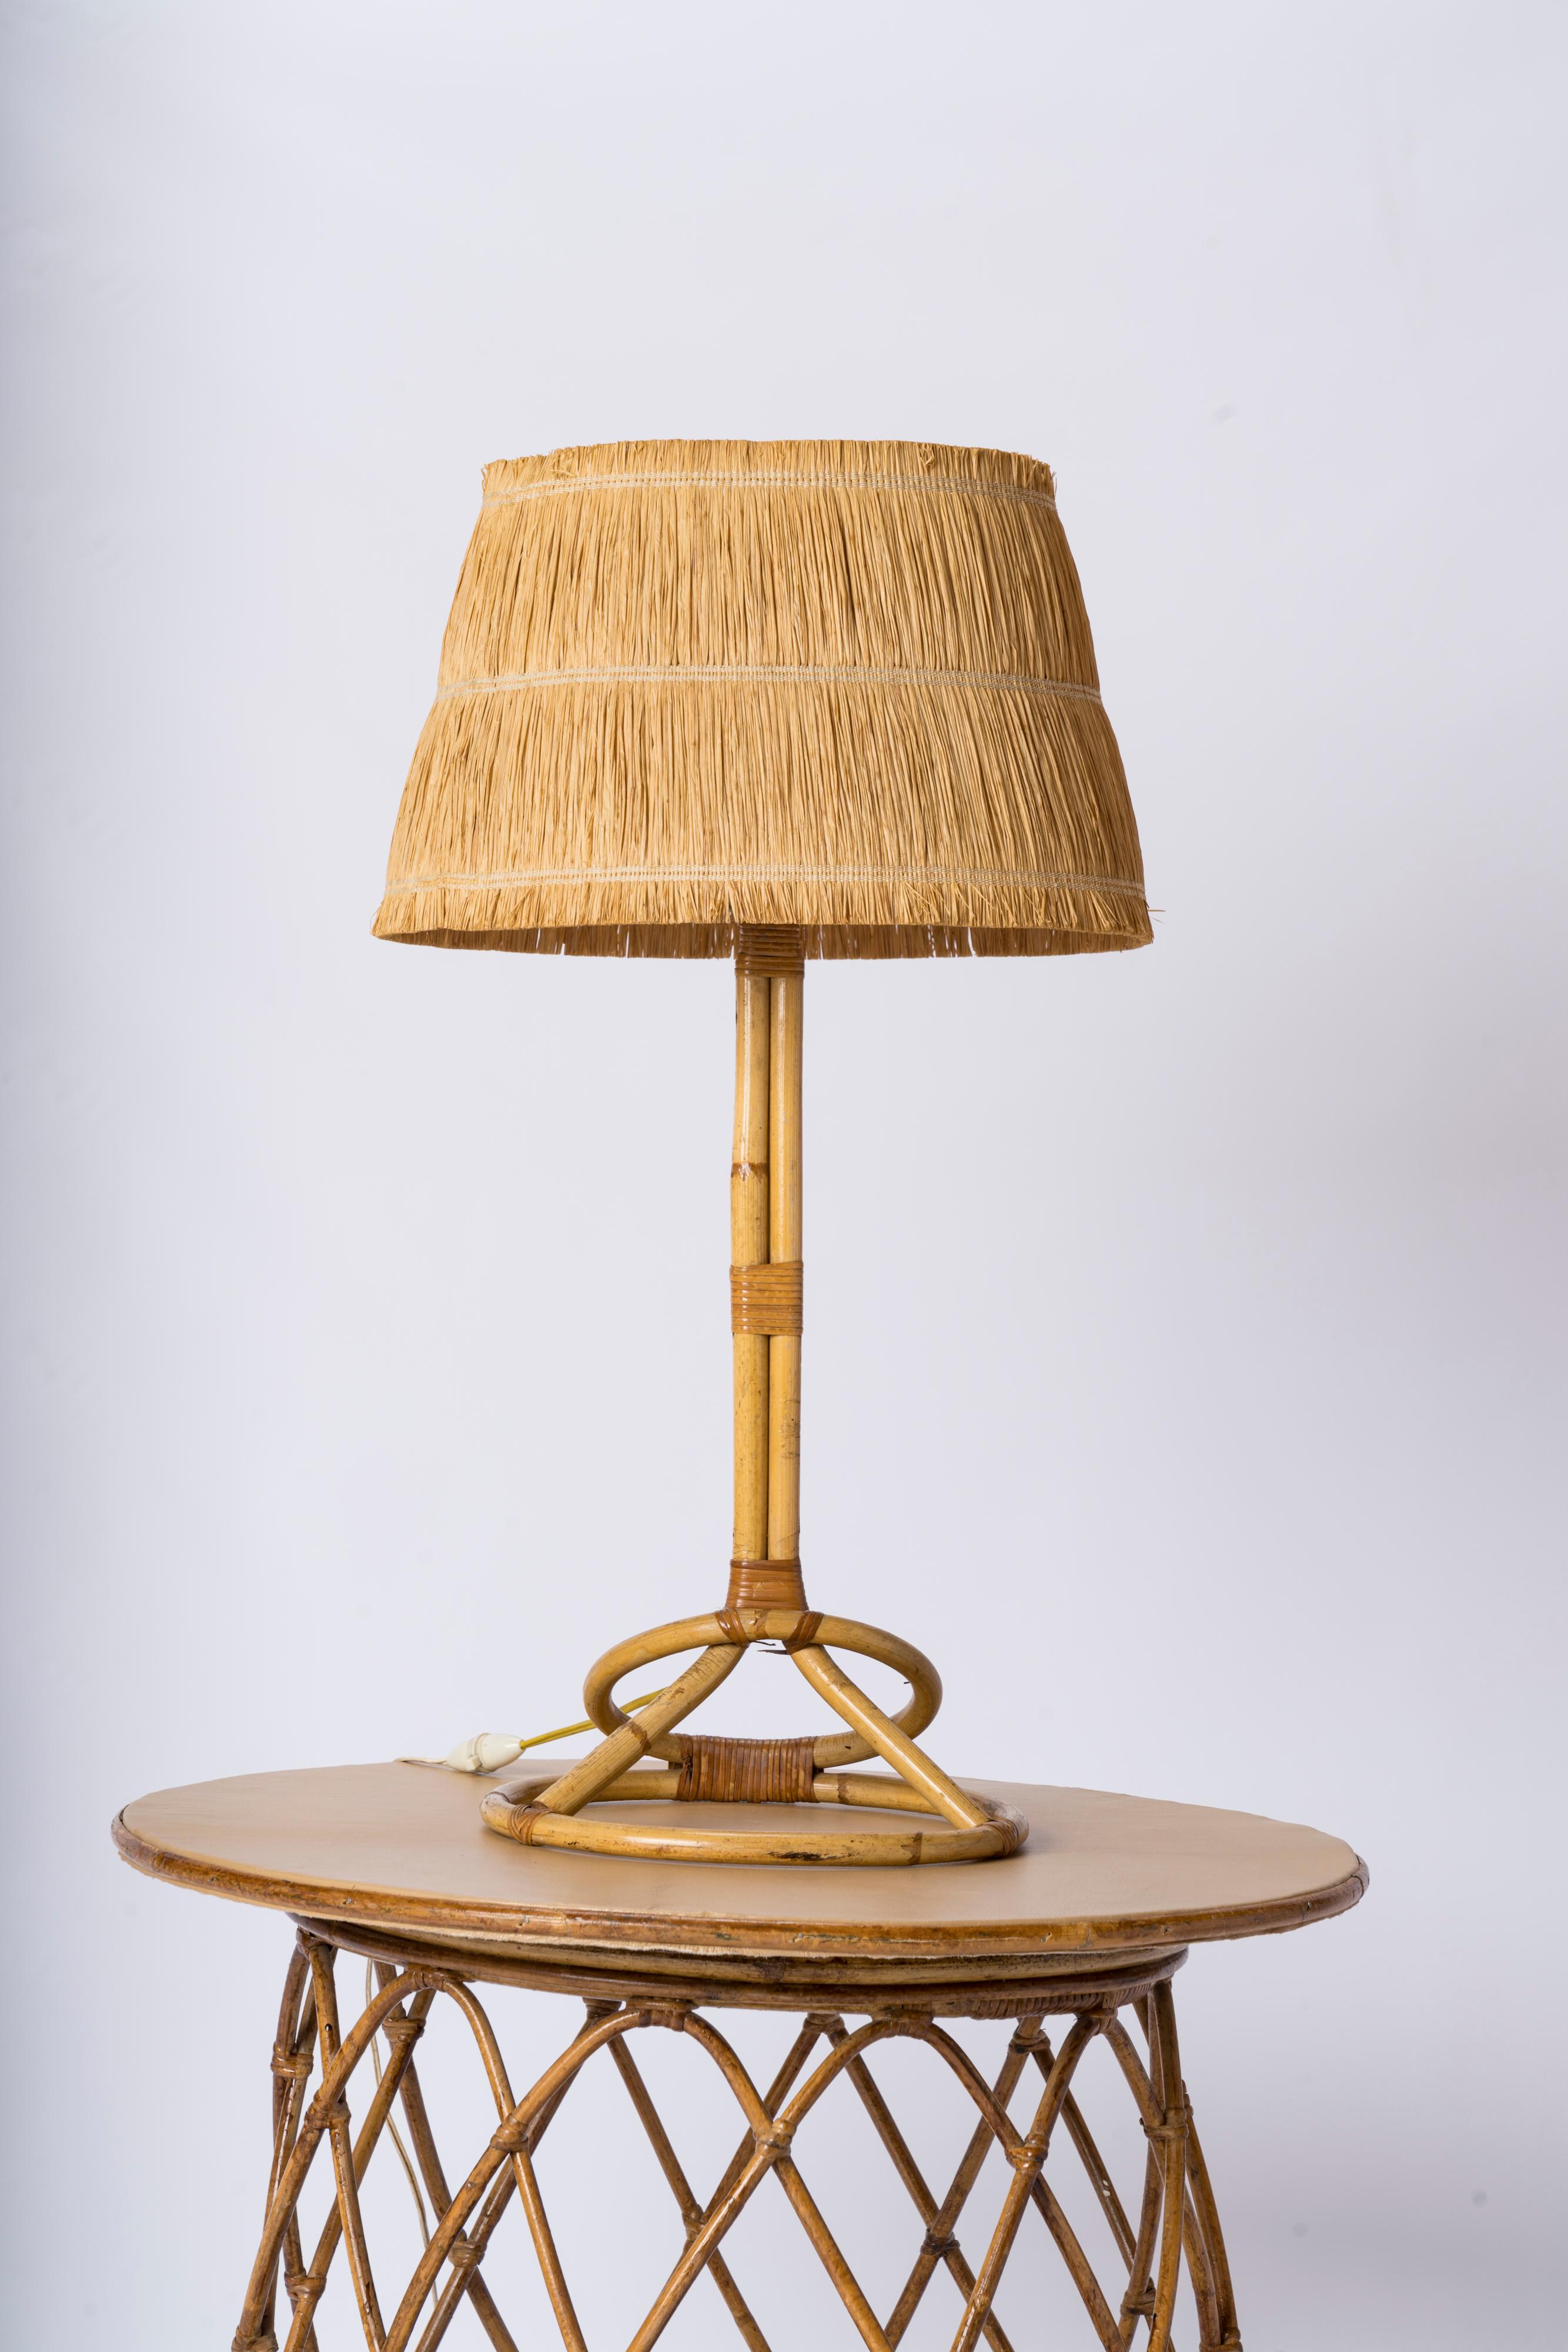 Tall Rattan Table Lamp w. Raffia Shade - France 1950's For Sale 1